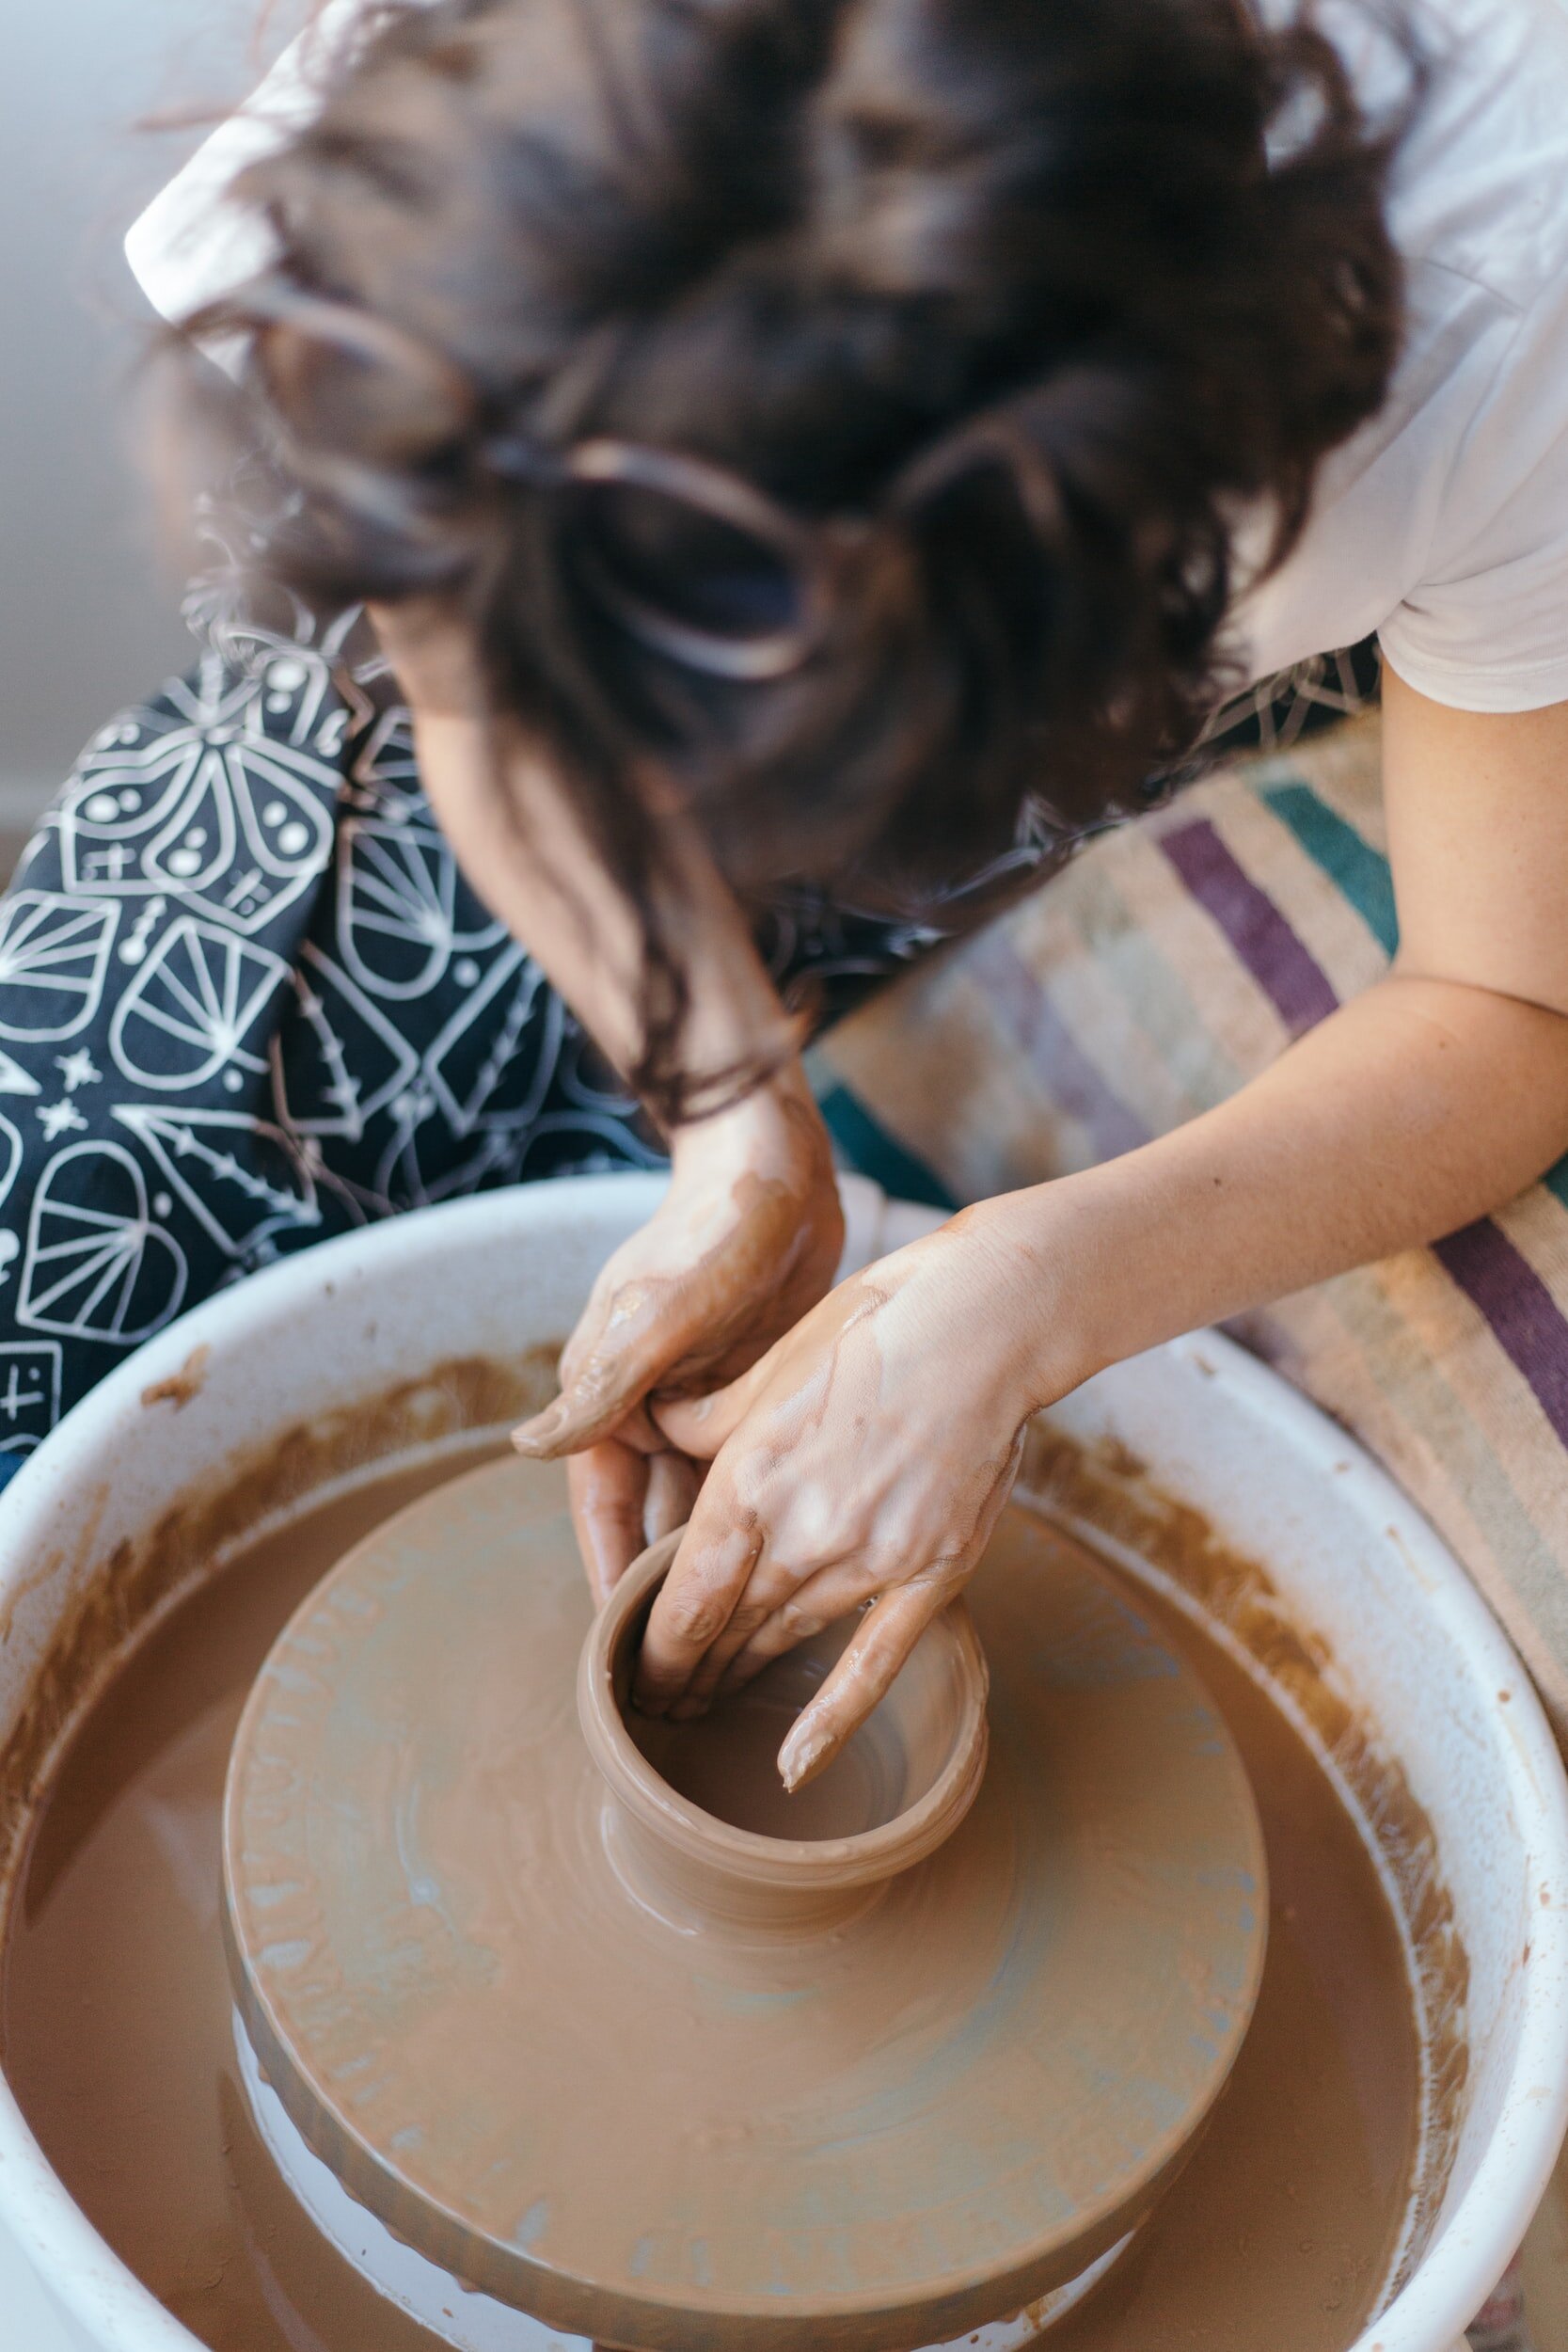 Woman works at a pottery wheel crafting with clay. Being a therapist can be an emotionally demanding and draining job. Learn self-care strategies here.